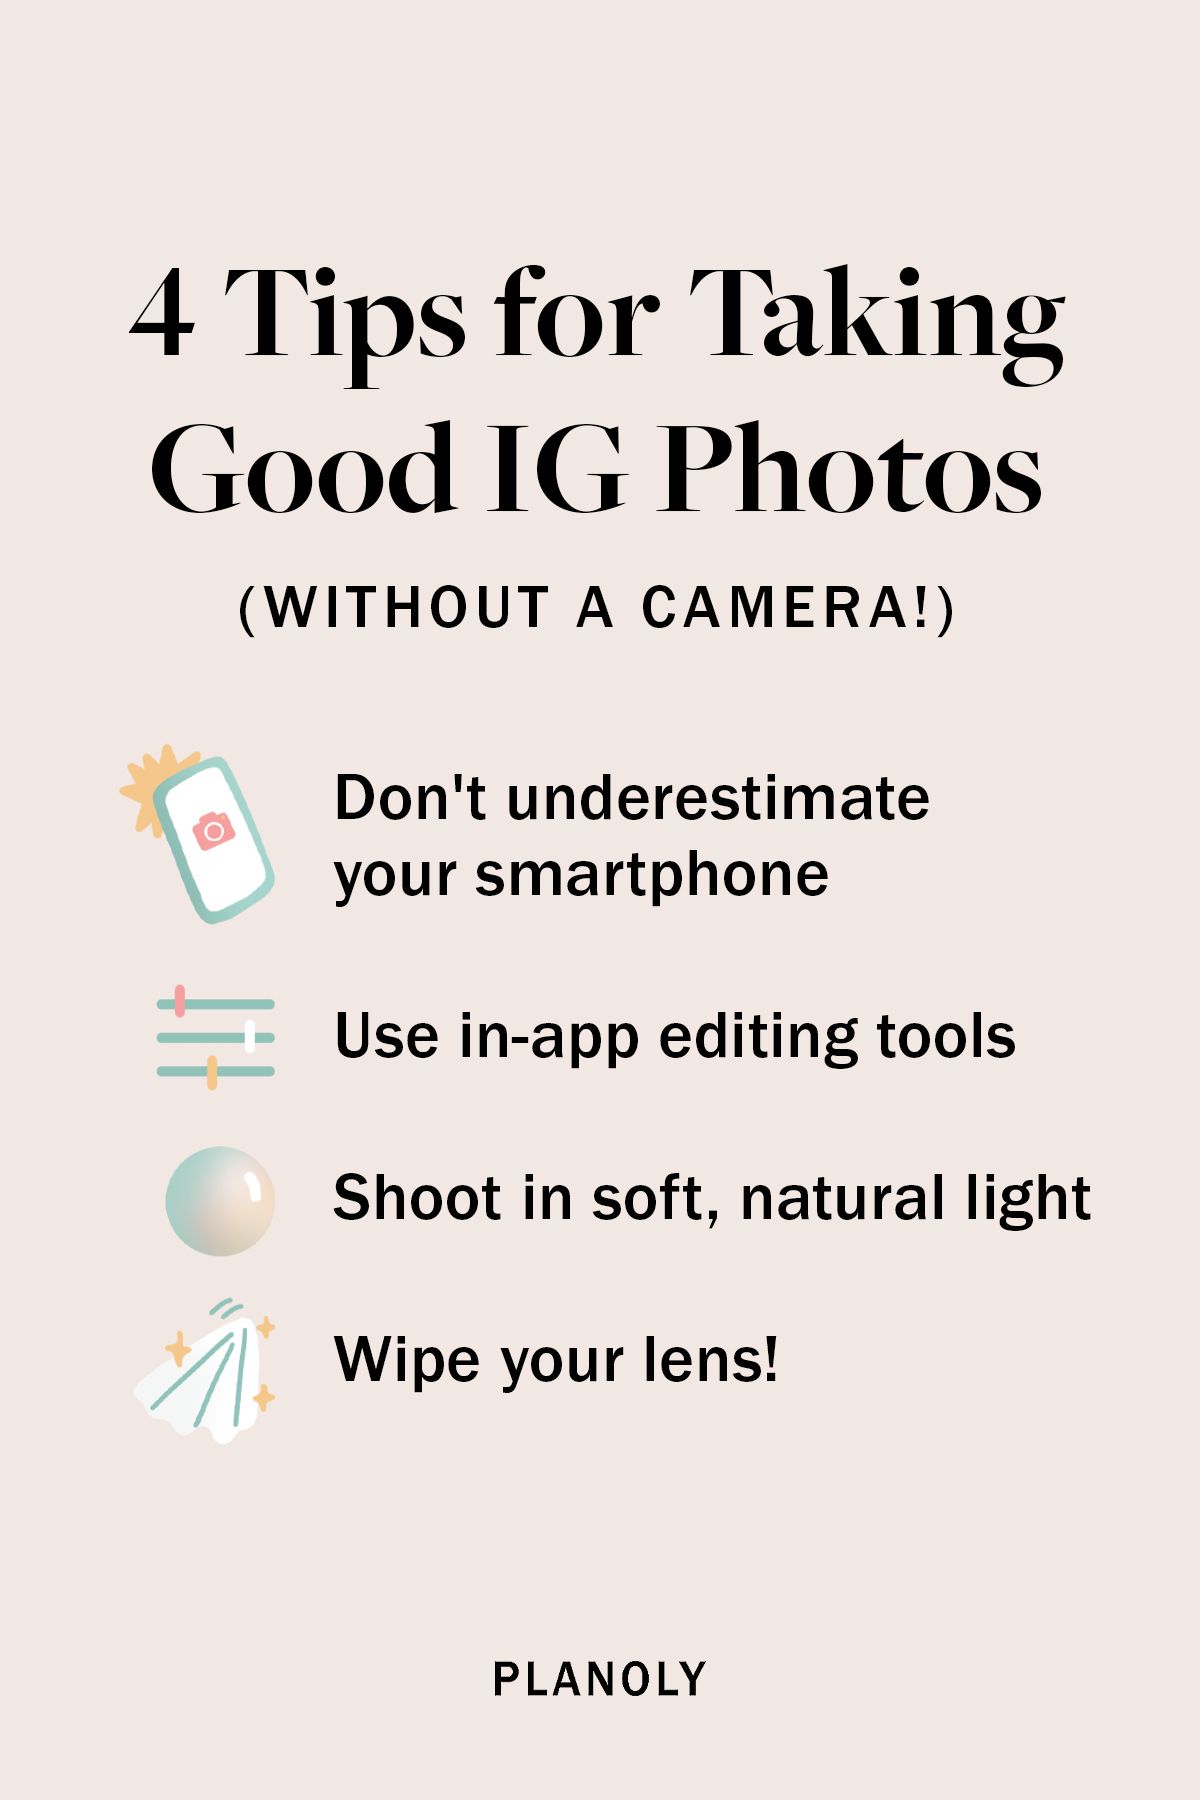 PLANOLY - Blog - How to Take Pictures for Instagram Without a Photographer - Vertical Image